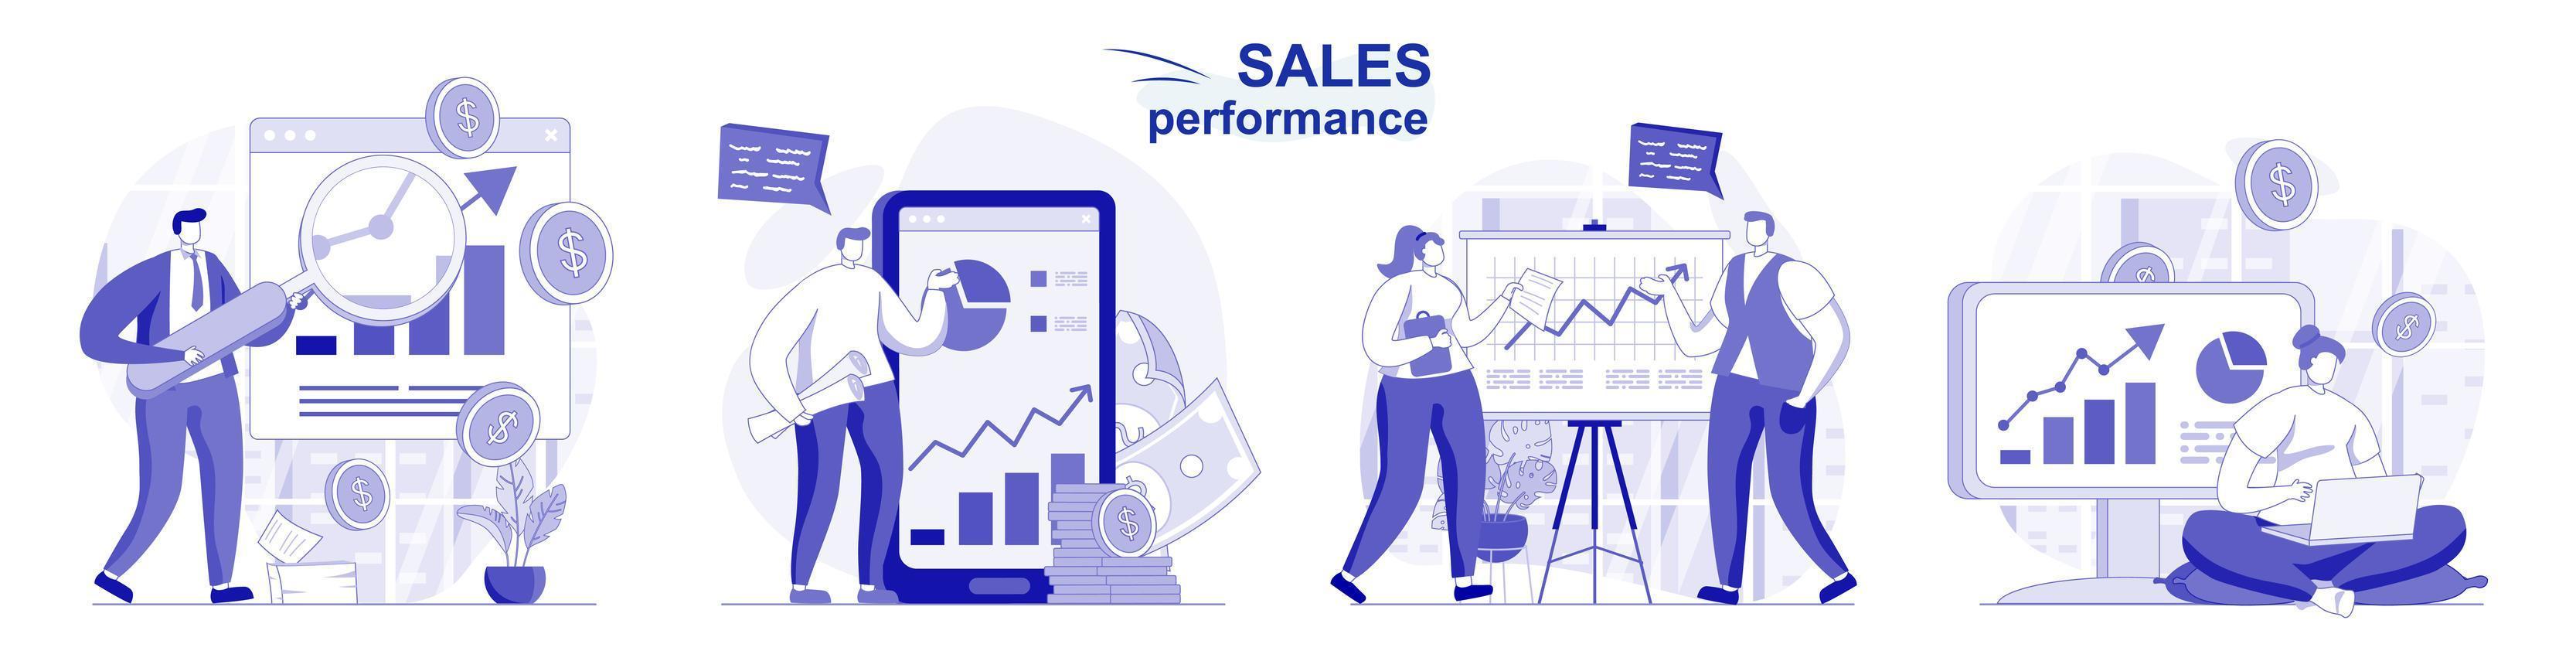 Sales performance isolated set in flat design. People analyzing financial data, earnings increase , collection of scenes. Vector illustration for blogging, website, mobile app, promotional materials.